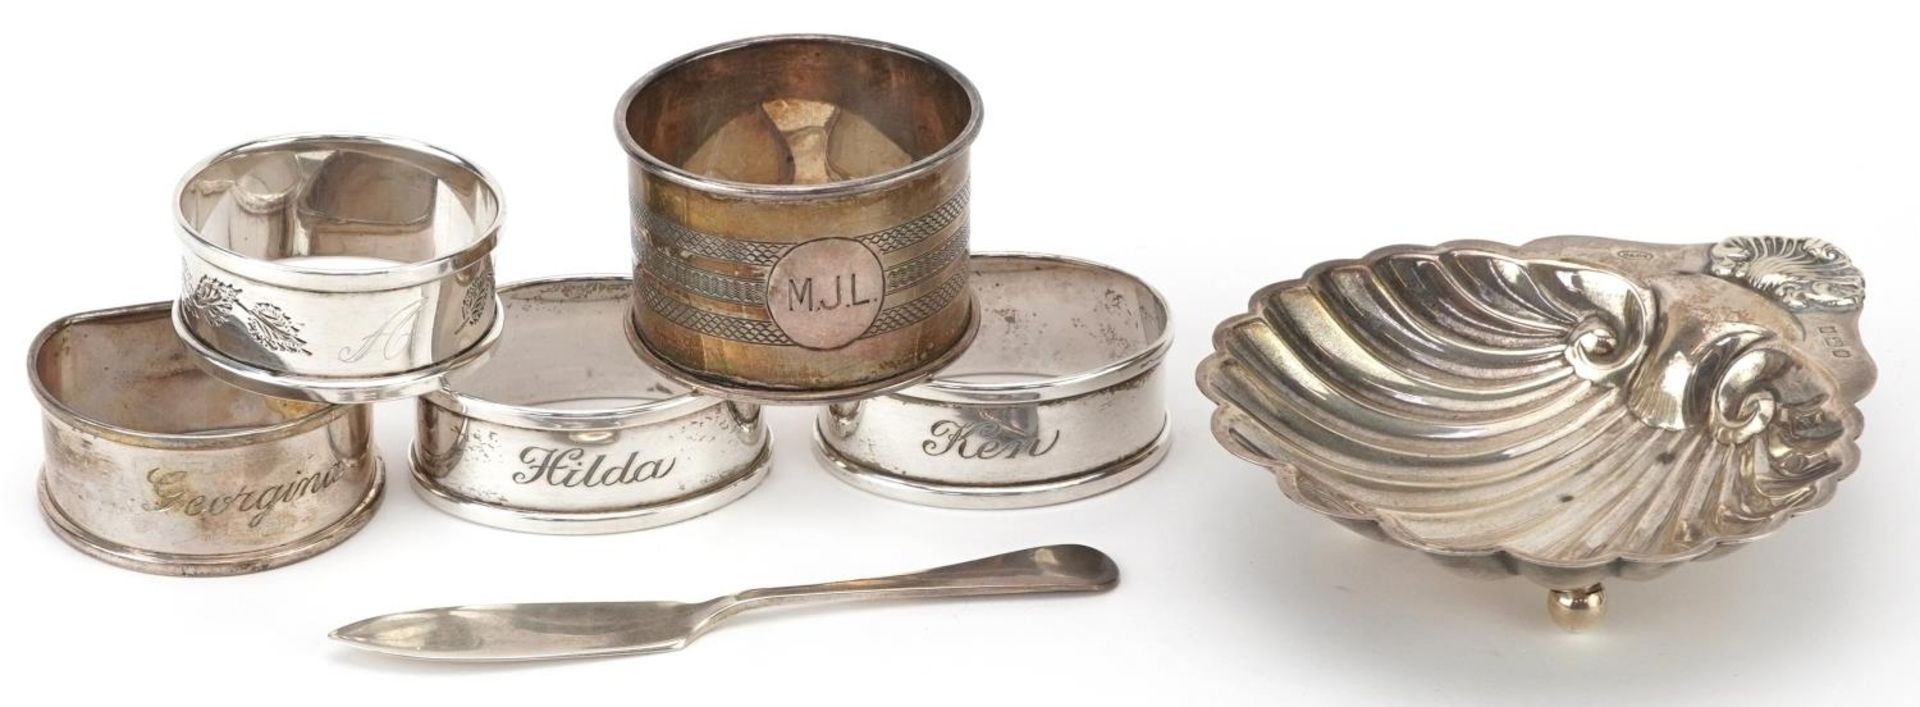 Edwardian and later silver objects comprising five napkin rings, butter knife and shell shaped